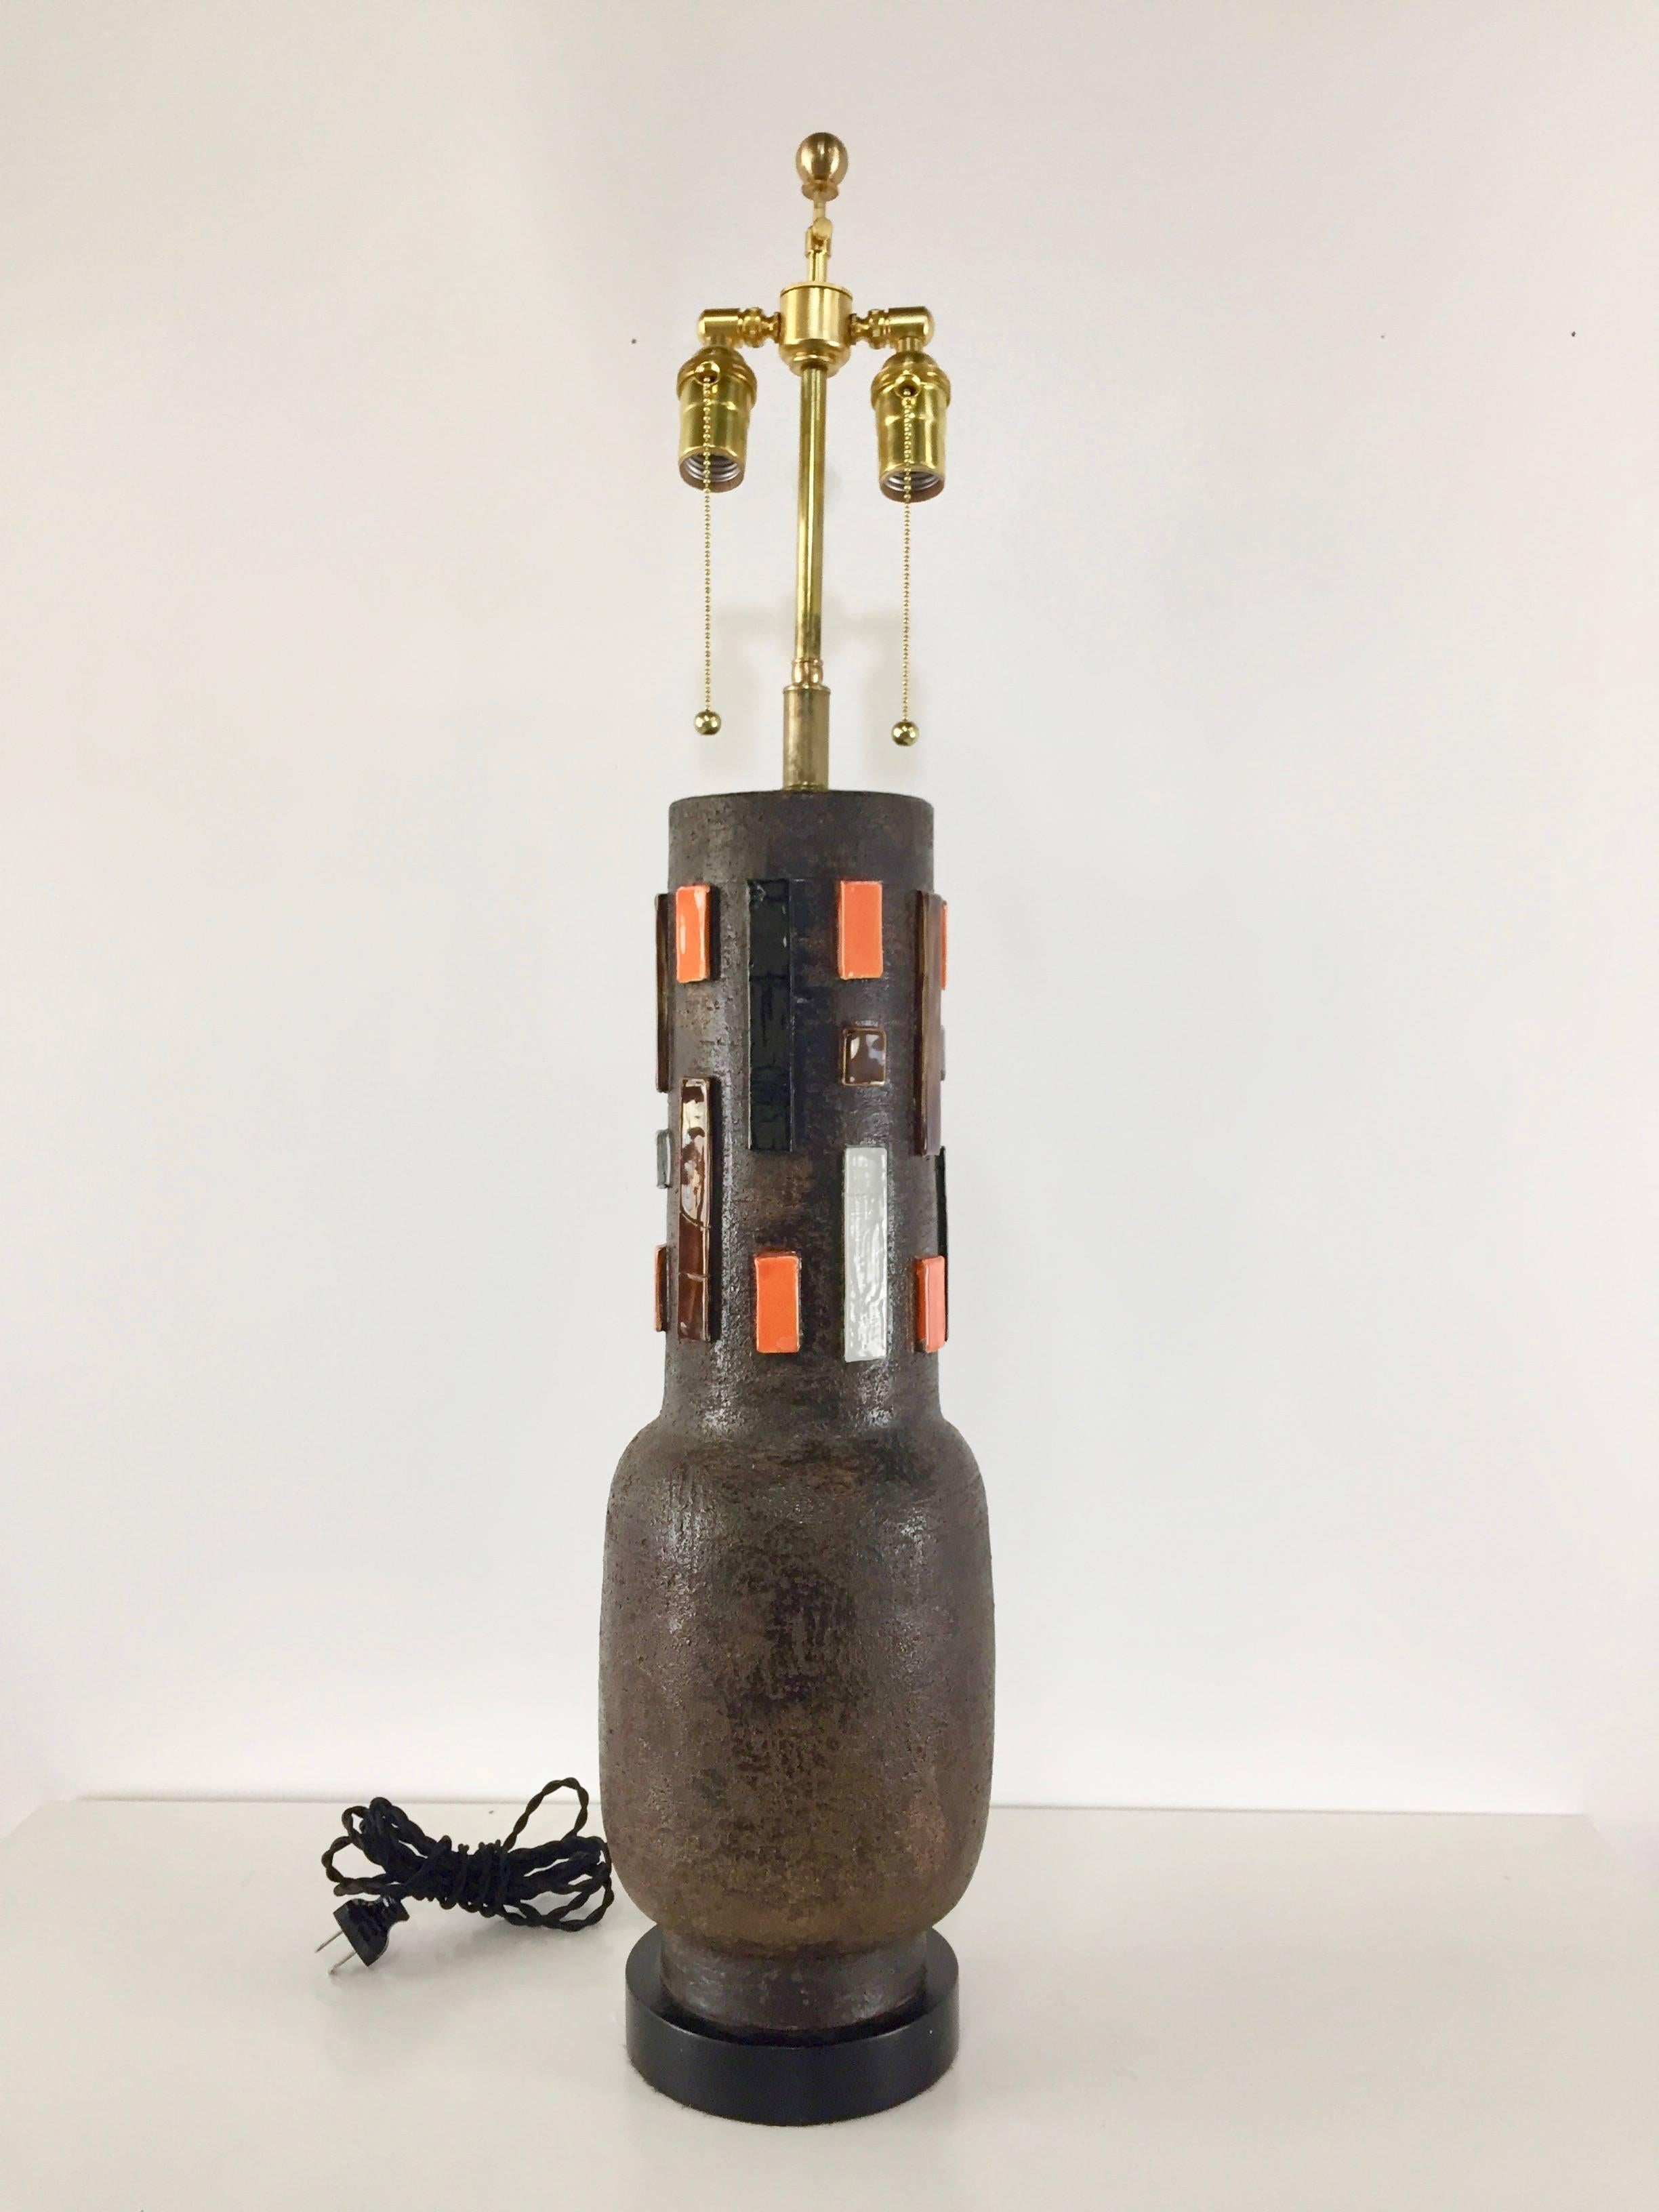 Aldo Londi Bitossi Italian pottery lamp. Long necked pottery element with raised blocks in orange, brown, white and black glaze. This lamp has had a total restoration including new hardware.

Ceramic element is 22" x 7" diameter.